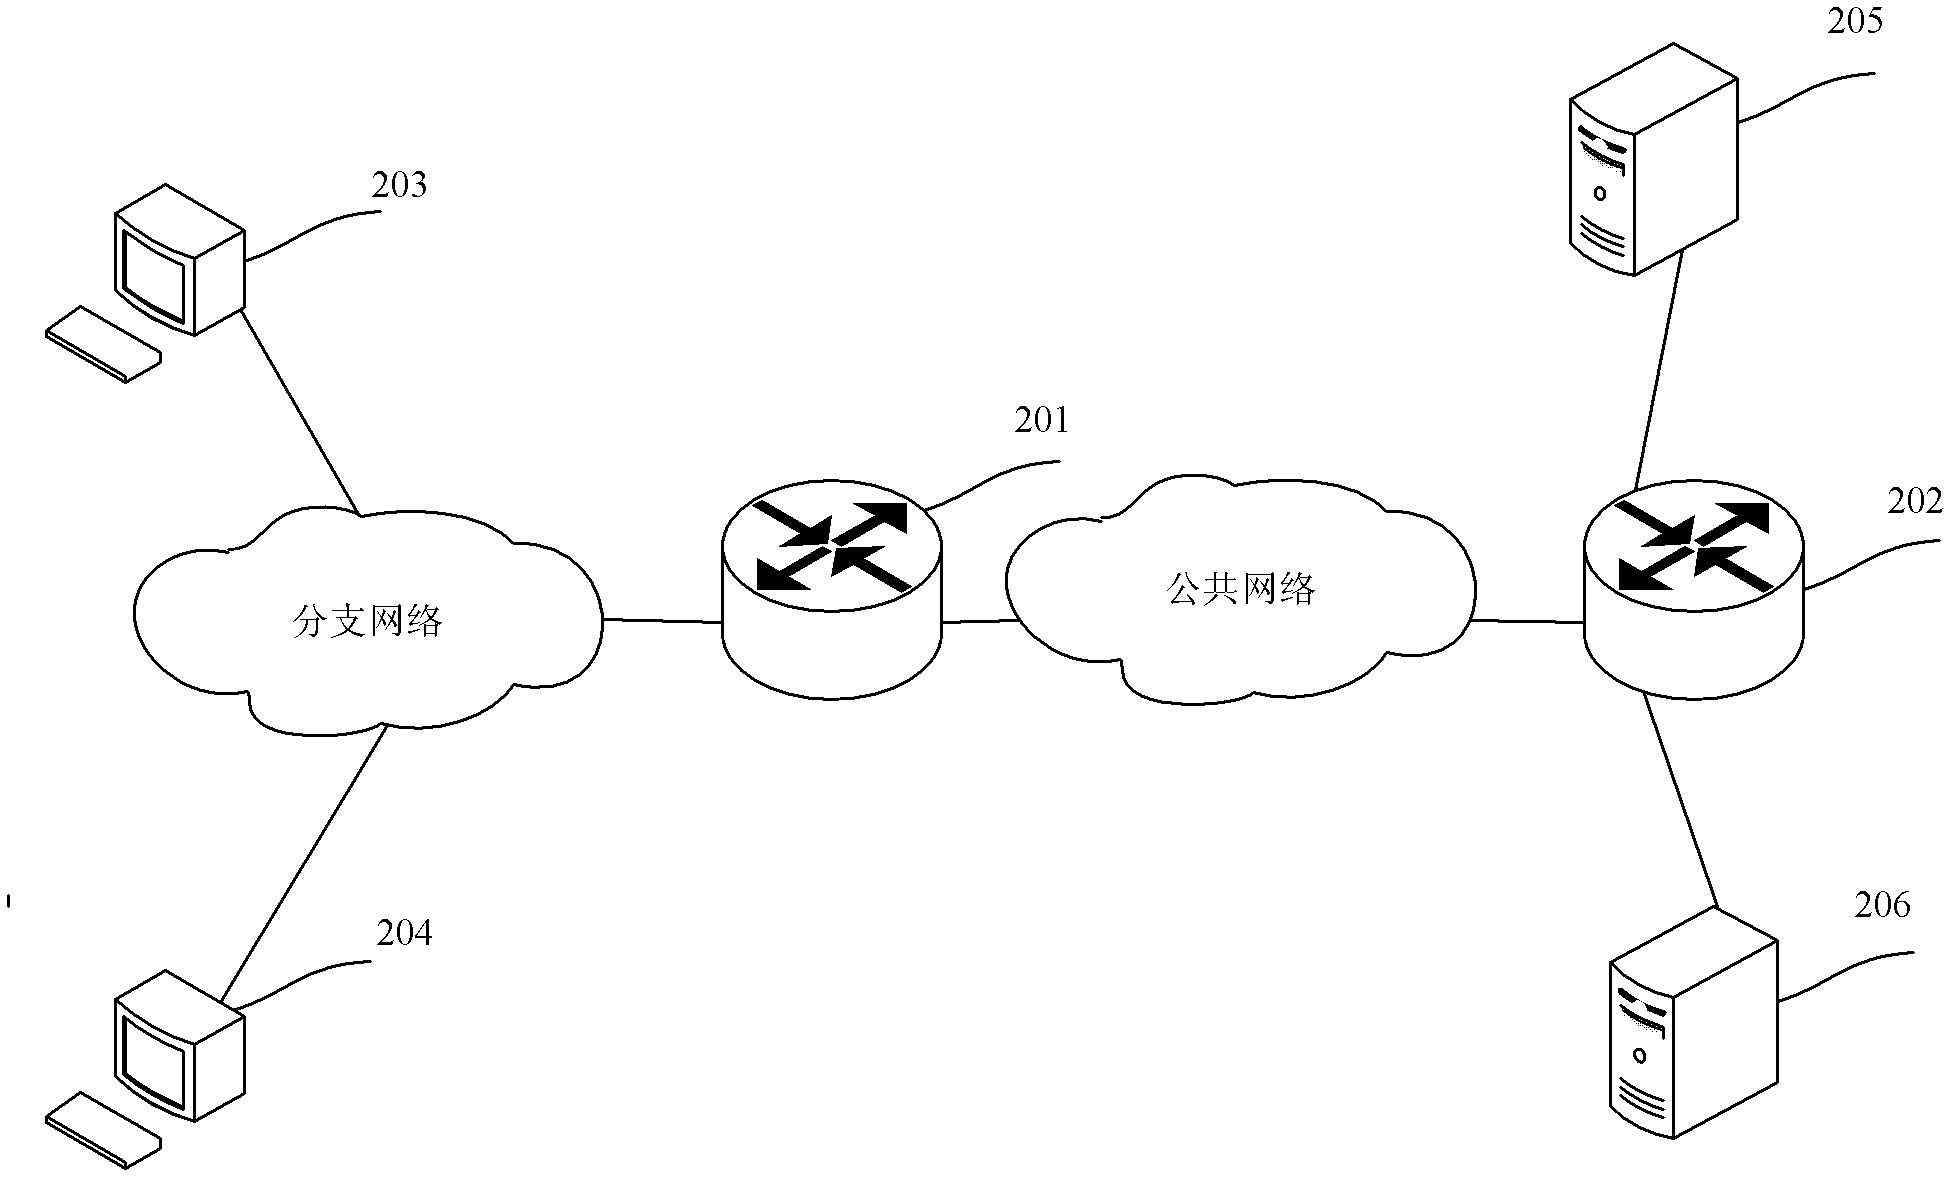 Message forwarding method and equipment